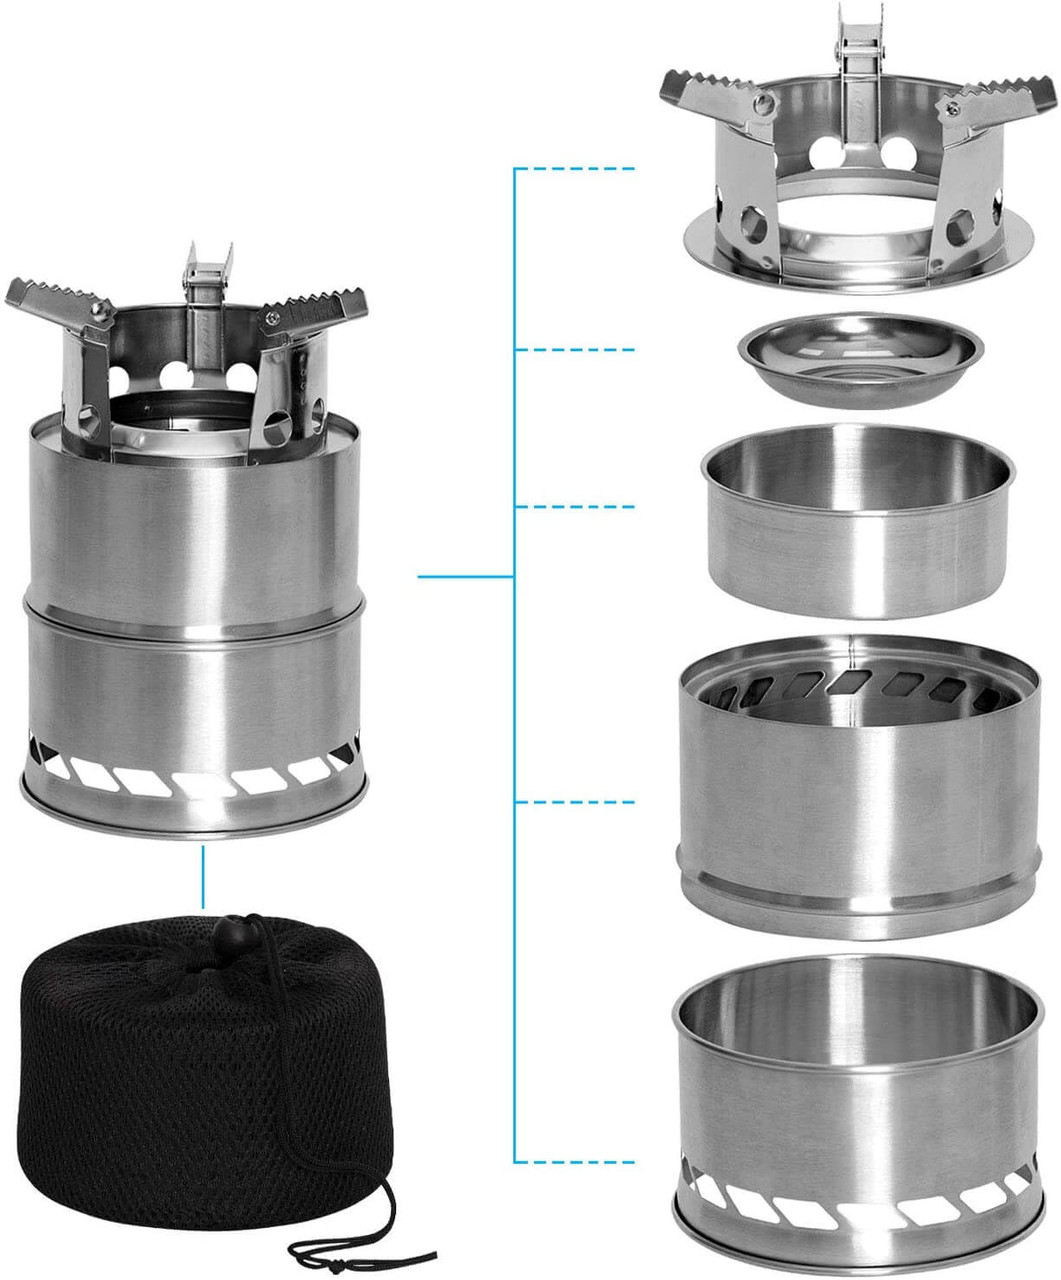 https://cdn11.bigcommerce.com/s-ovptlwt64t/images/stencil/1280x1280/products/763/3416/Rothco-Stainless-Steel-Portable-Camping-Backpacking-Stove-2__74850.1634013449.jpg?c=1?imbypass=on